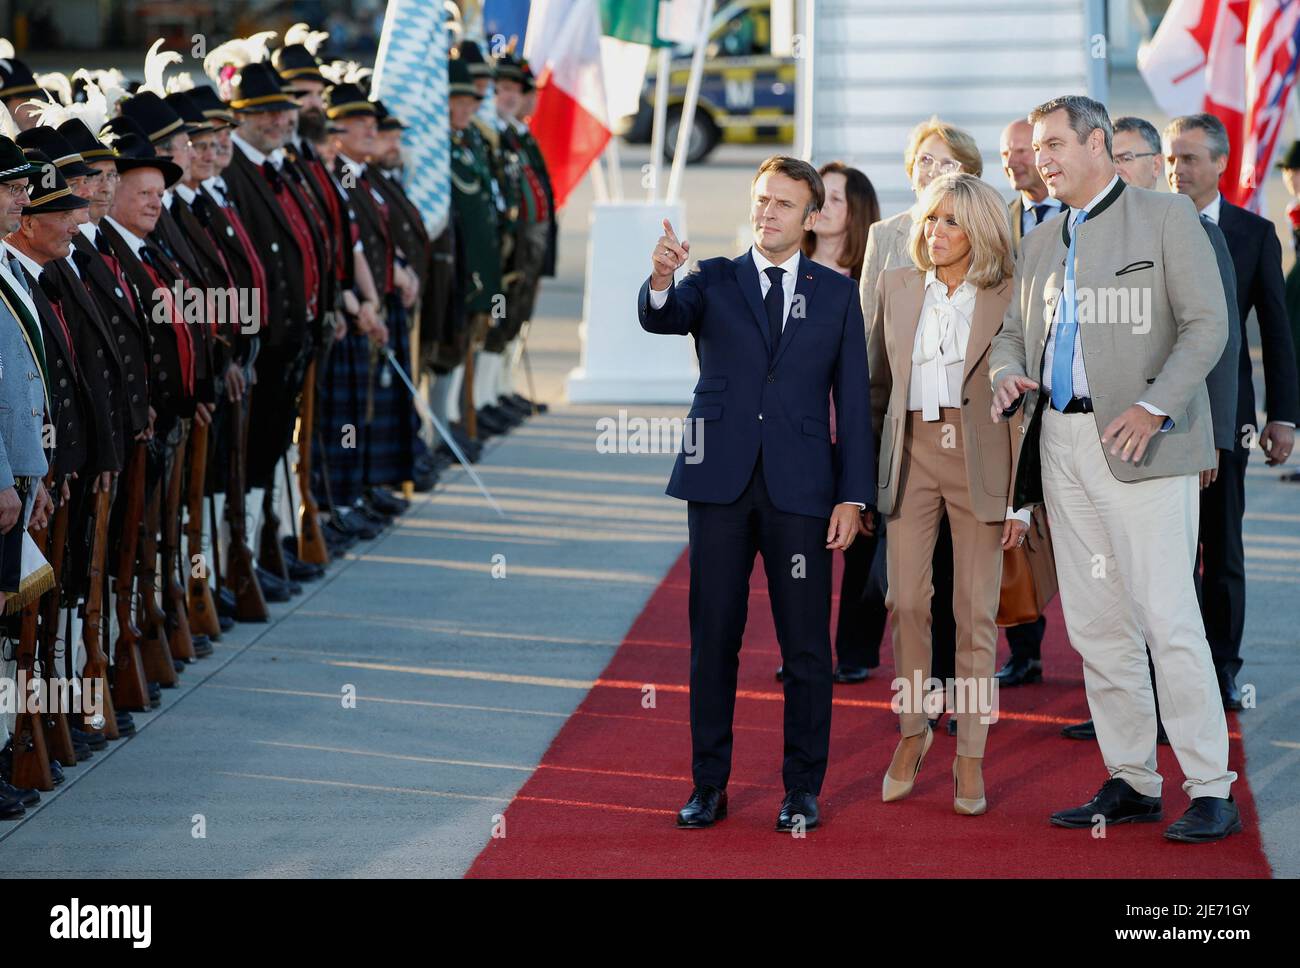 French President Emmanuel Macron and his wife Brigitte Macron are greeted by Bavaria's State Premier Markus Soeder upon their arrival at Franz-Josef-Strauss airport in Munich ahead of the G7 summit, which will take place in the Bavarian alpine resort of Elmau Castle, Germany, June 25, 2022. REUTERS/Michaela Rehle Stock Photo